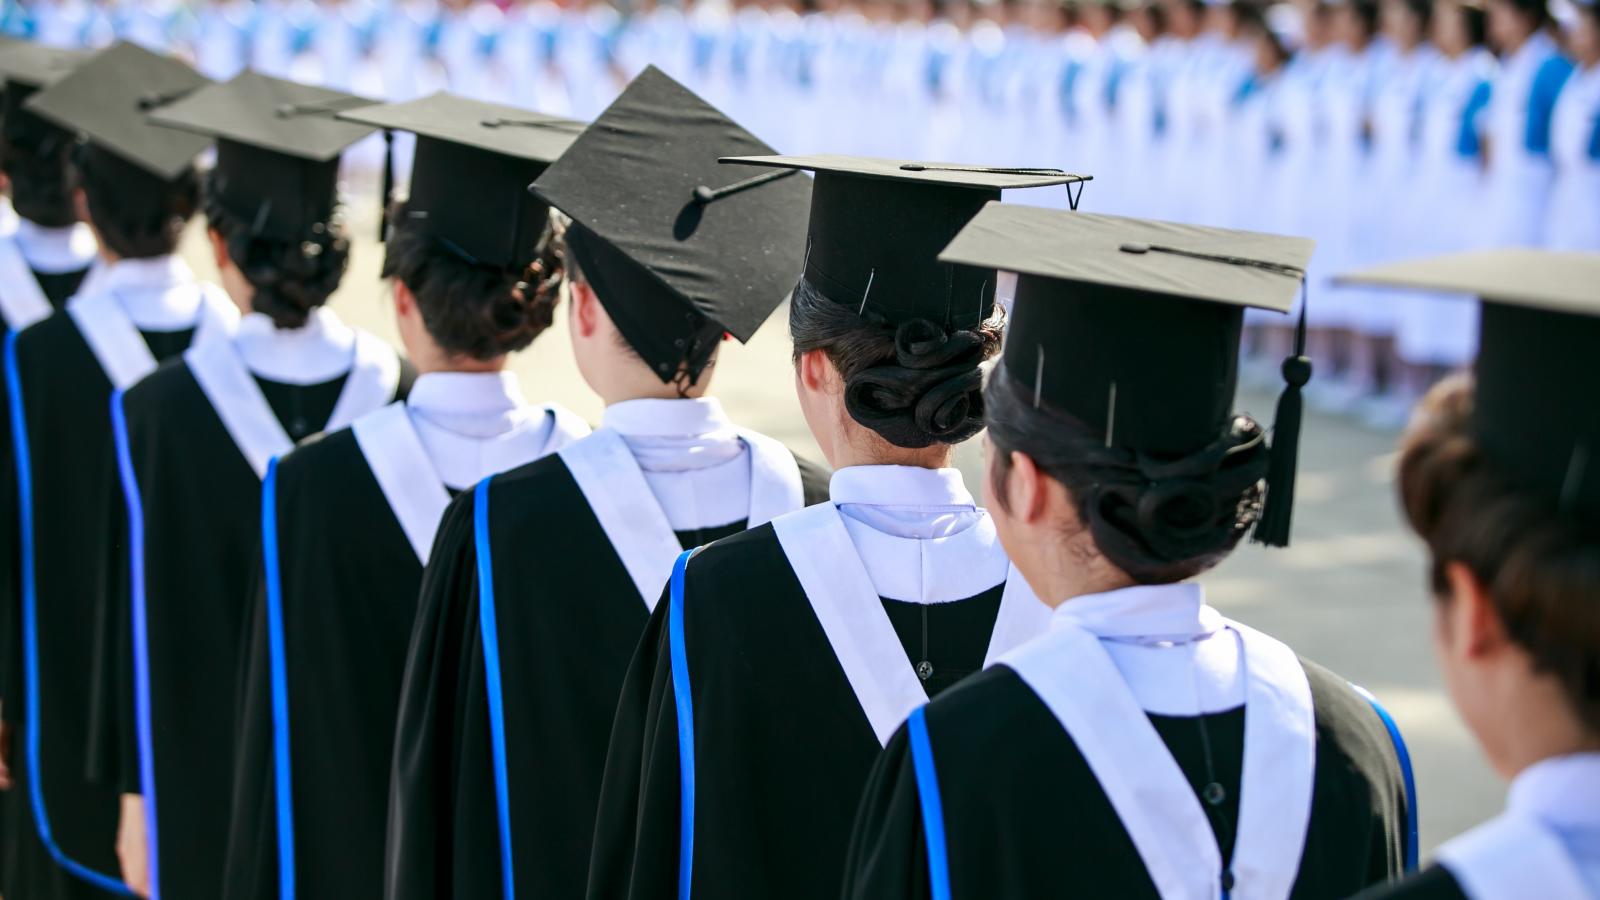 Line of graduates in caps and gowns